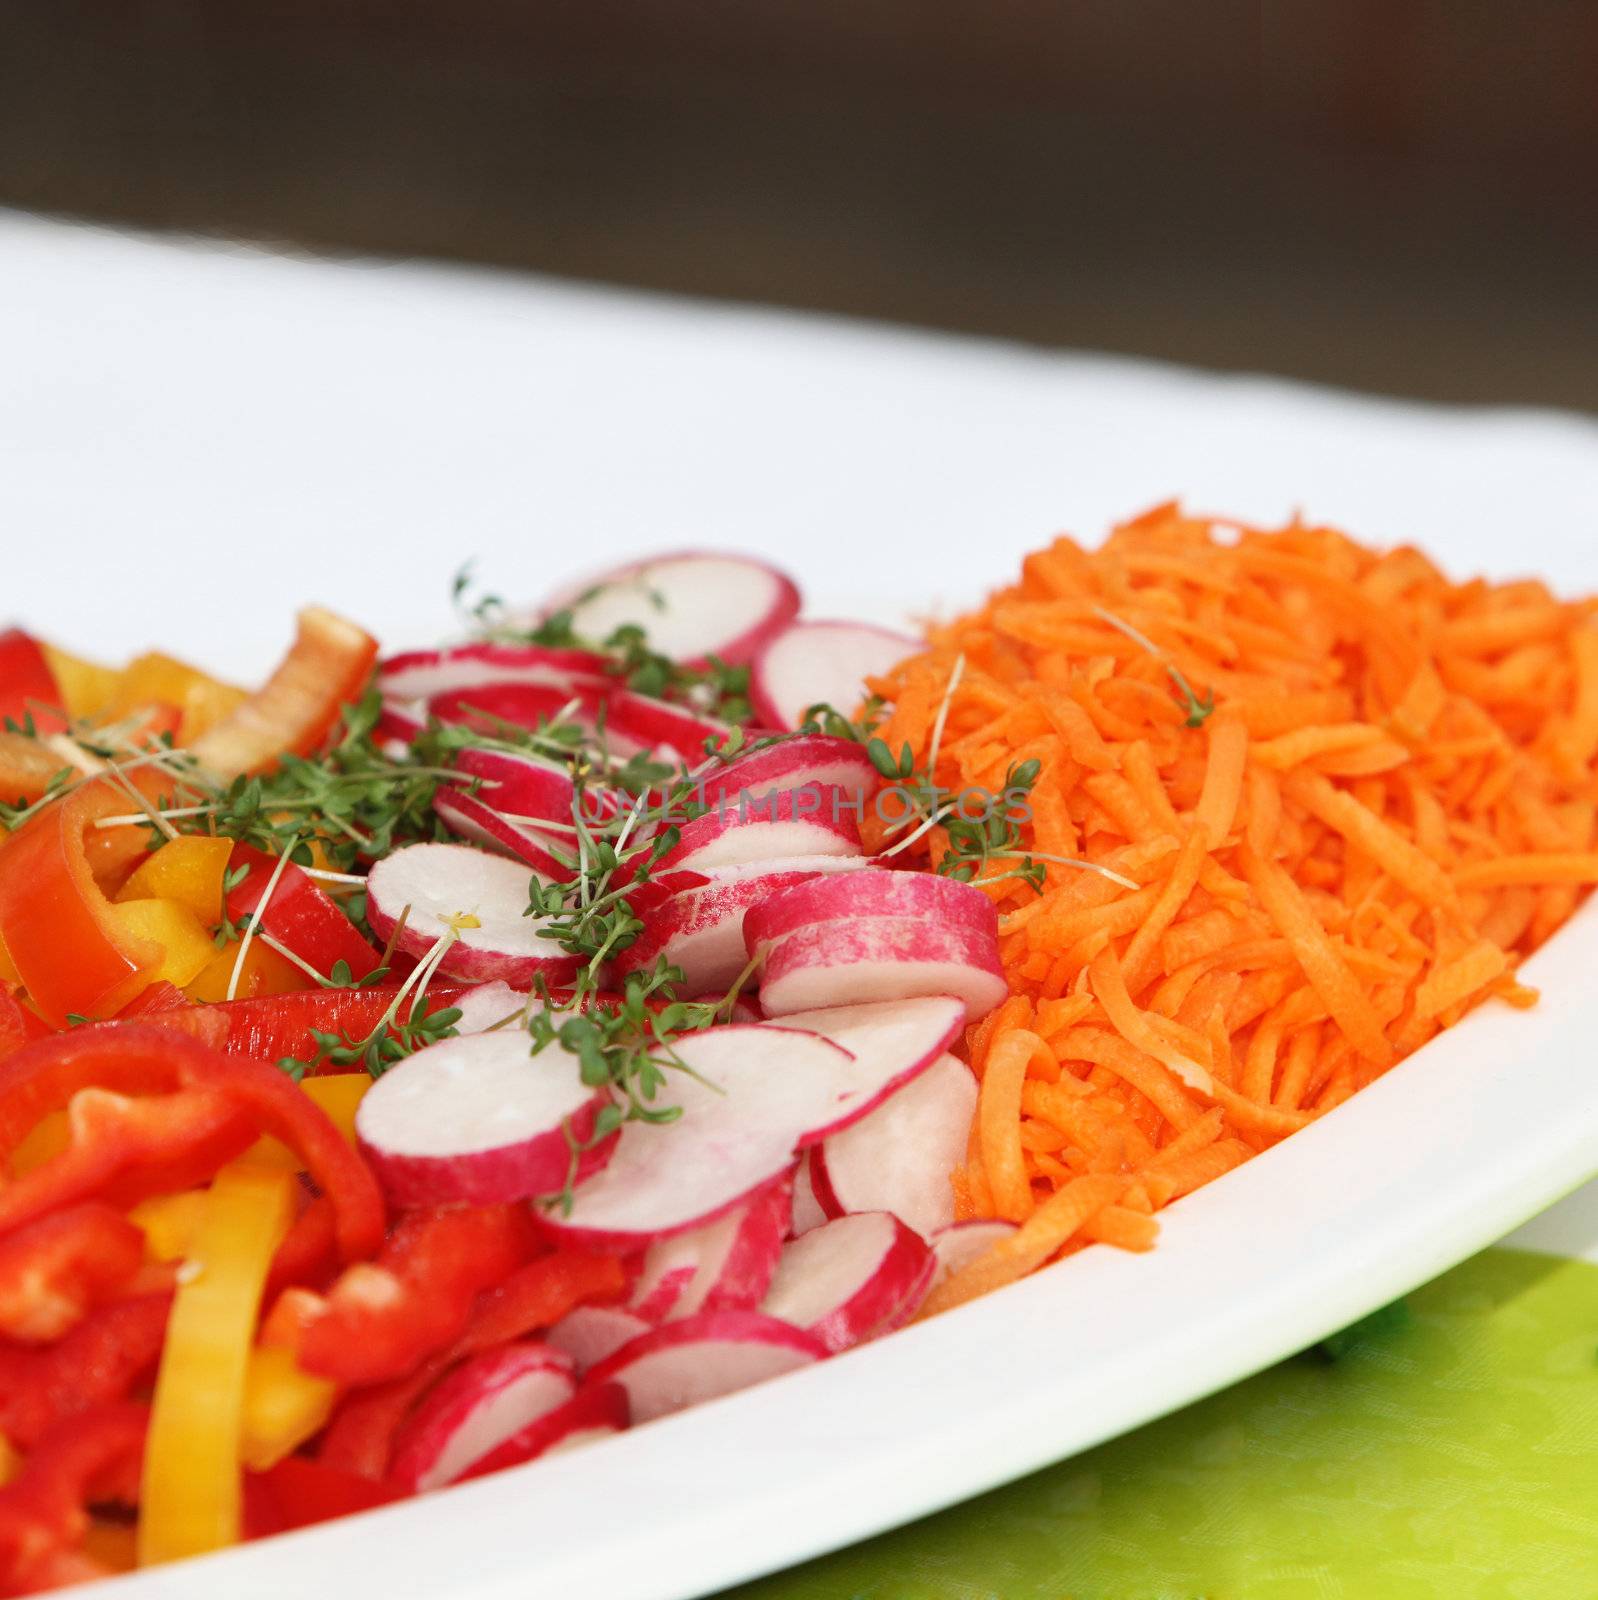 garnished, fresh salad with radishes, carrots and peppers  by Farina6000